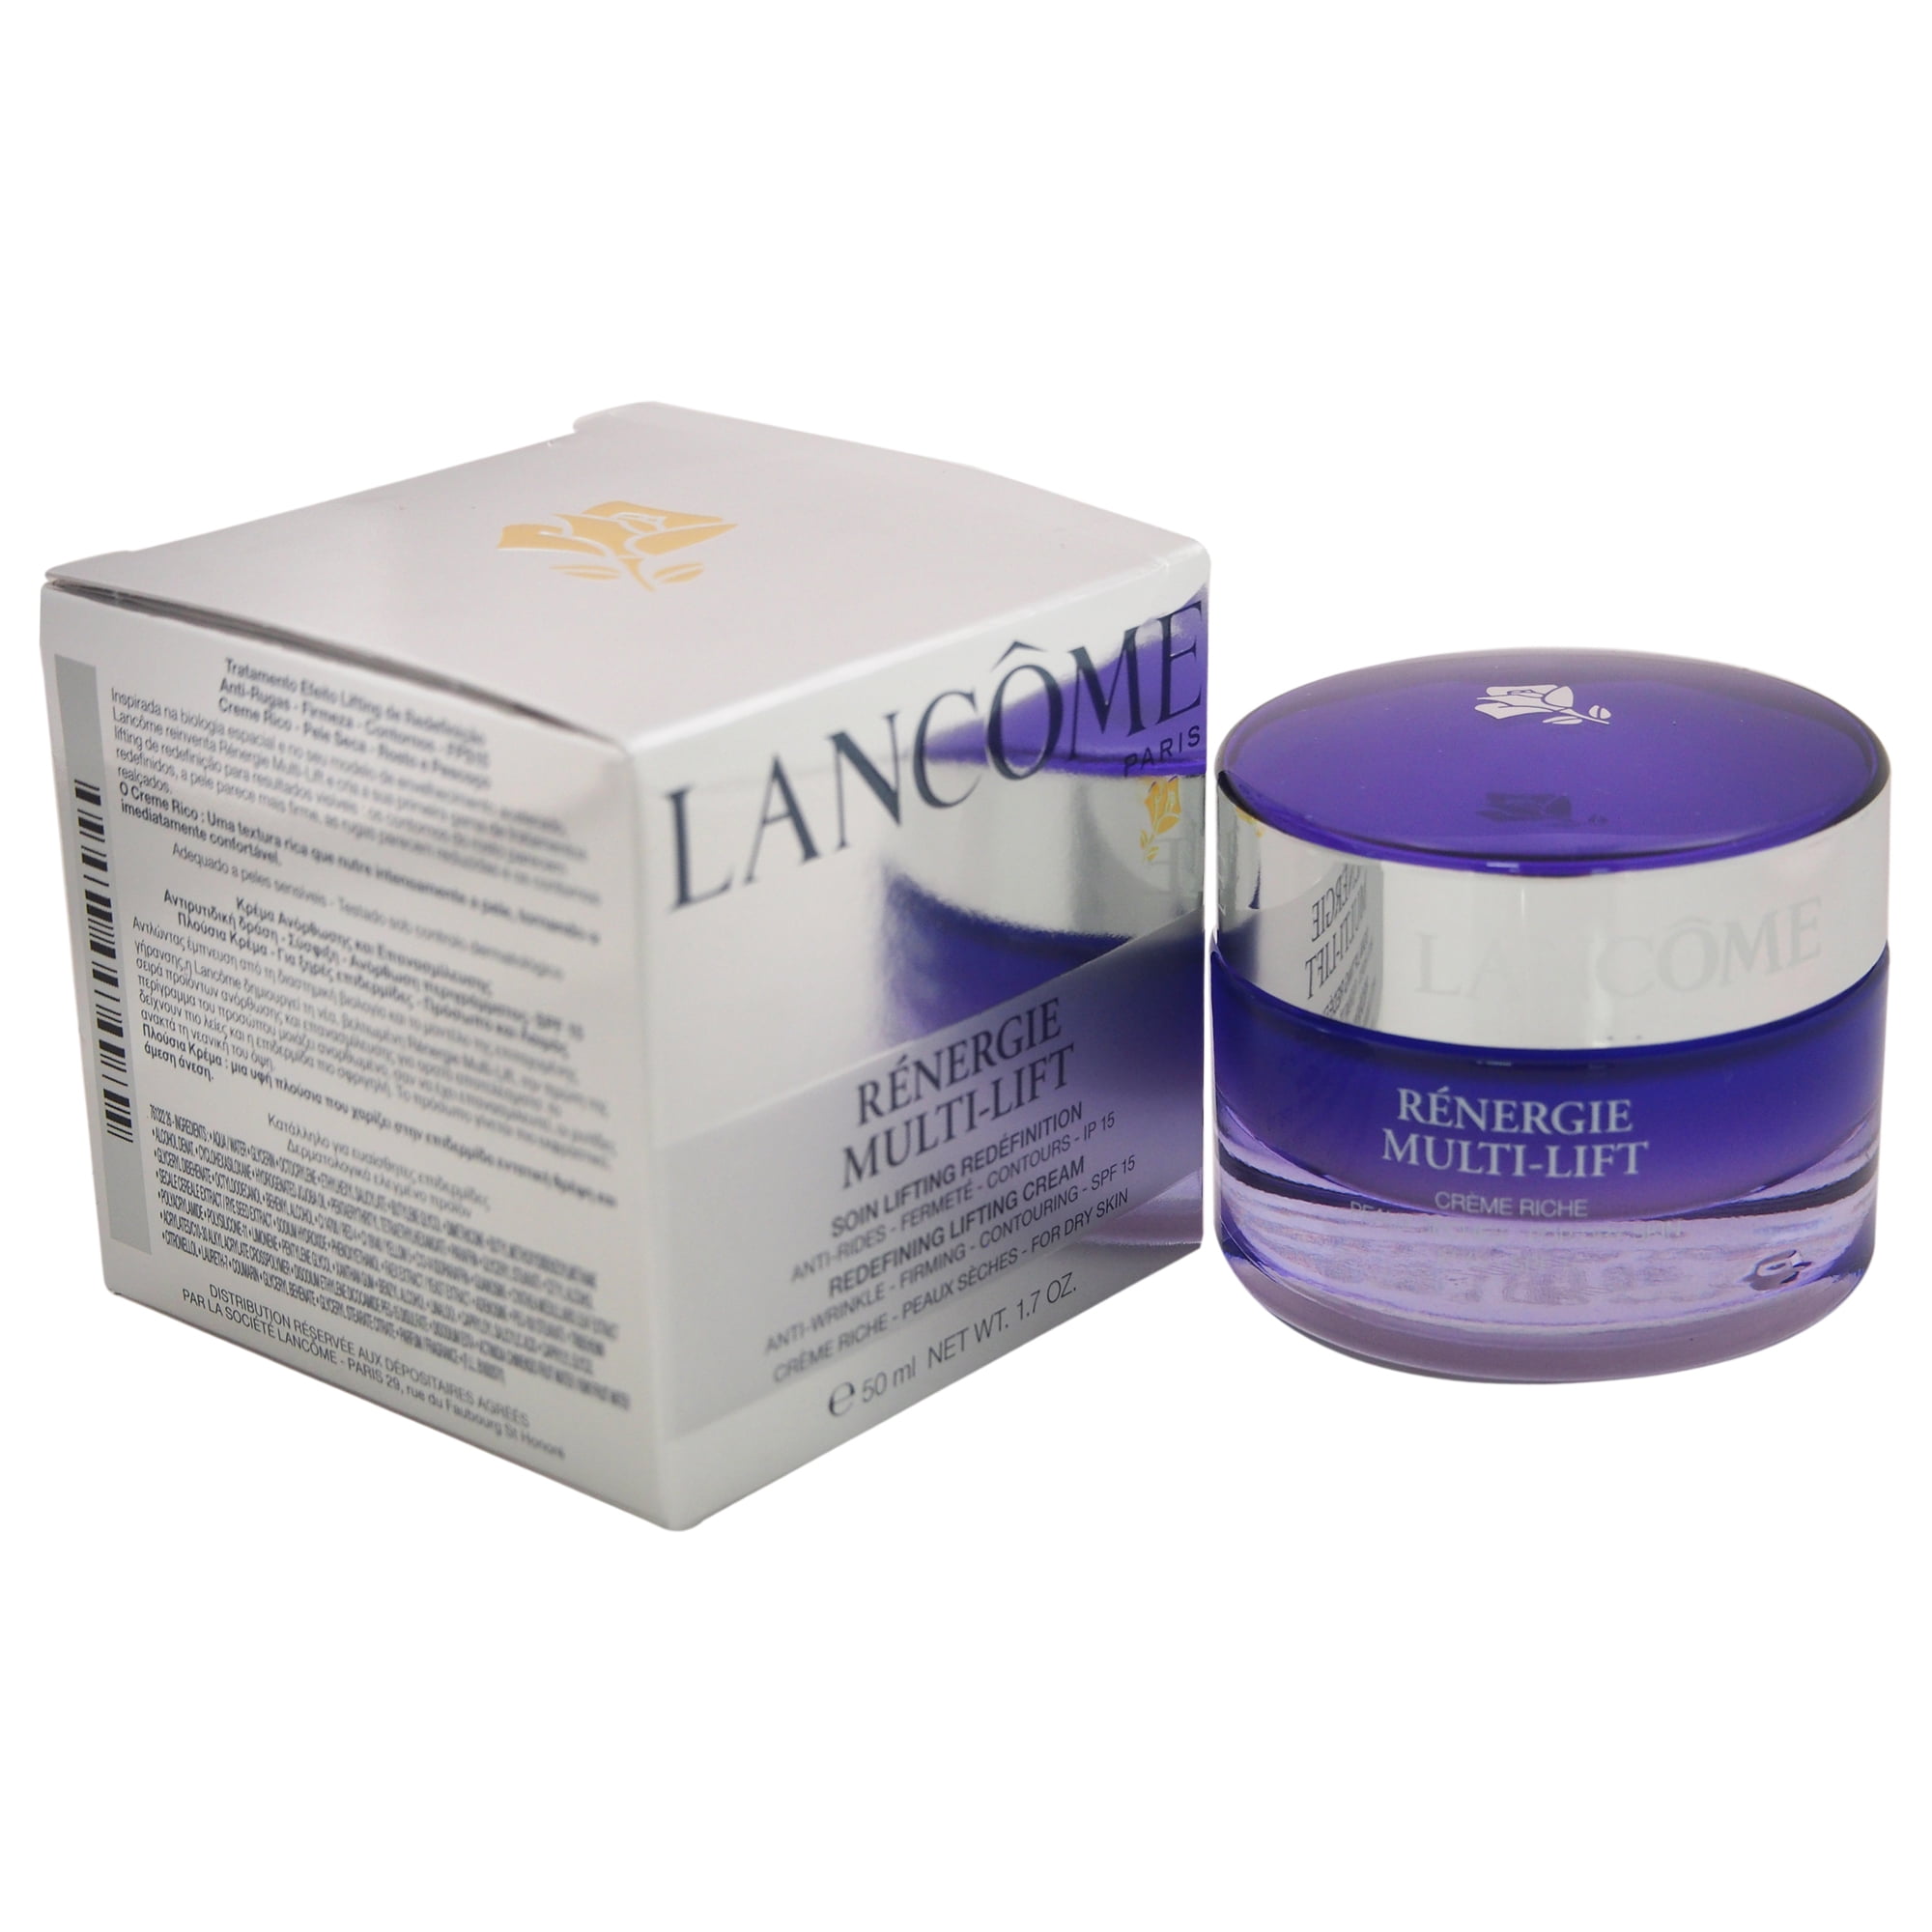 Renergie Multi-Lift Redefining Lifting Cream SPF 15 - Dry Skin Types by Lancome  for Unisex - 1.7 oz Cream